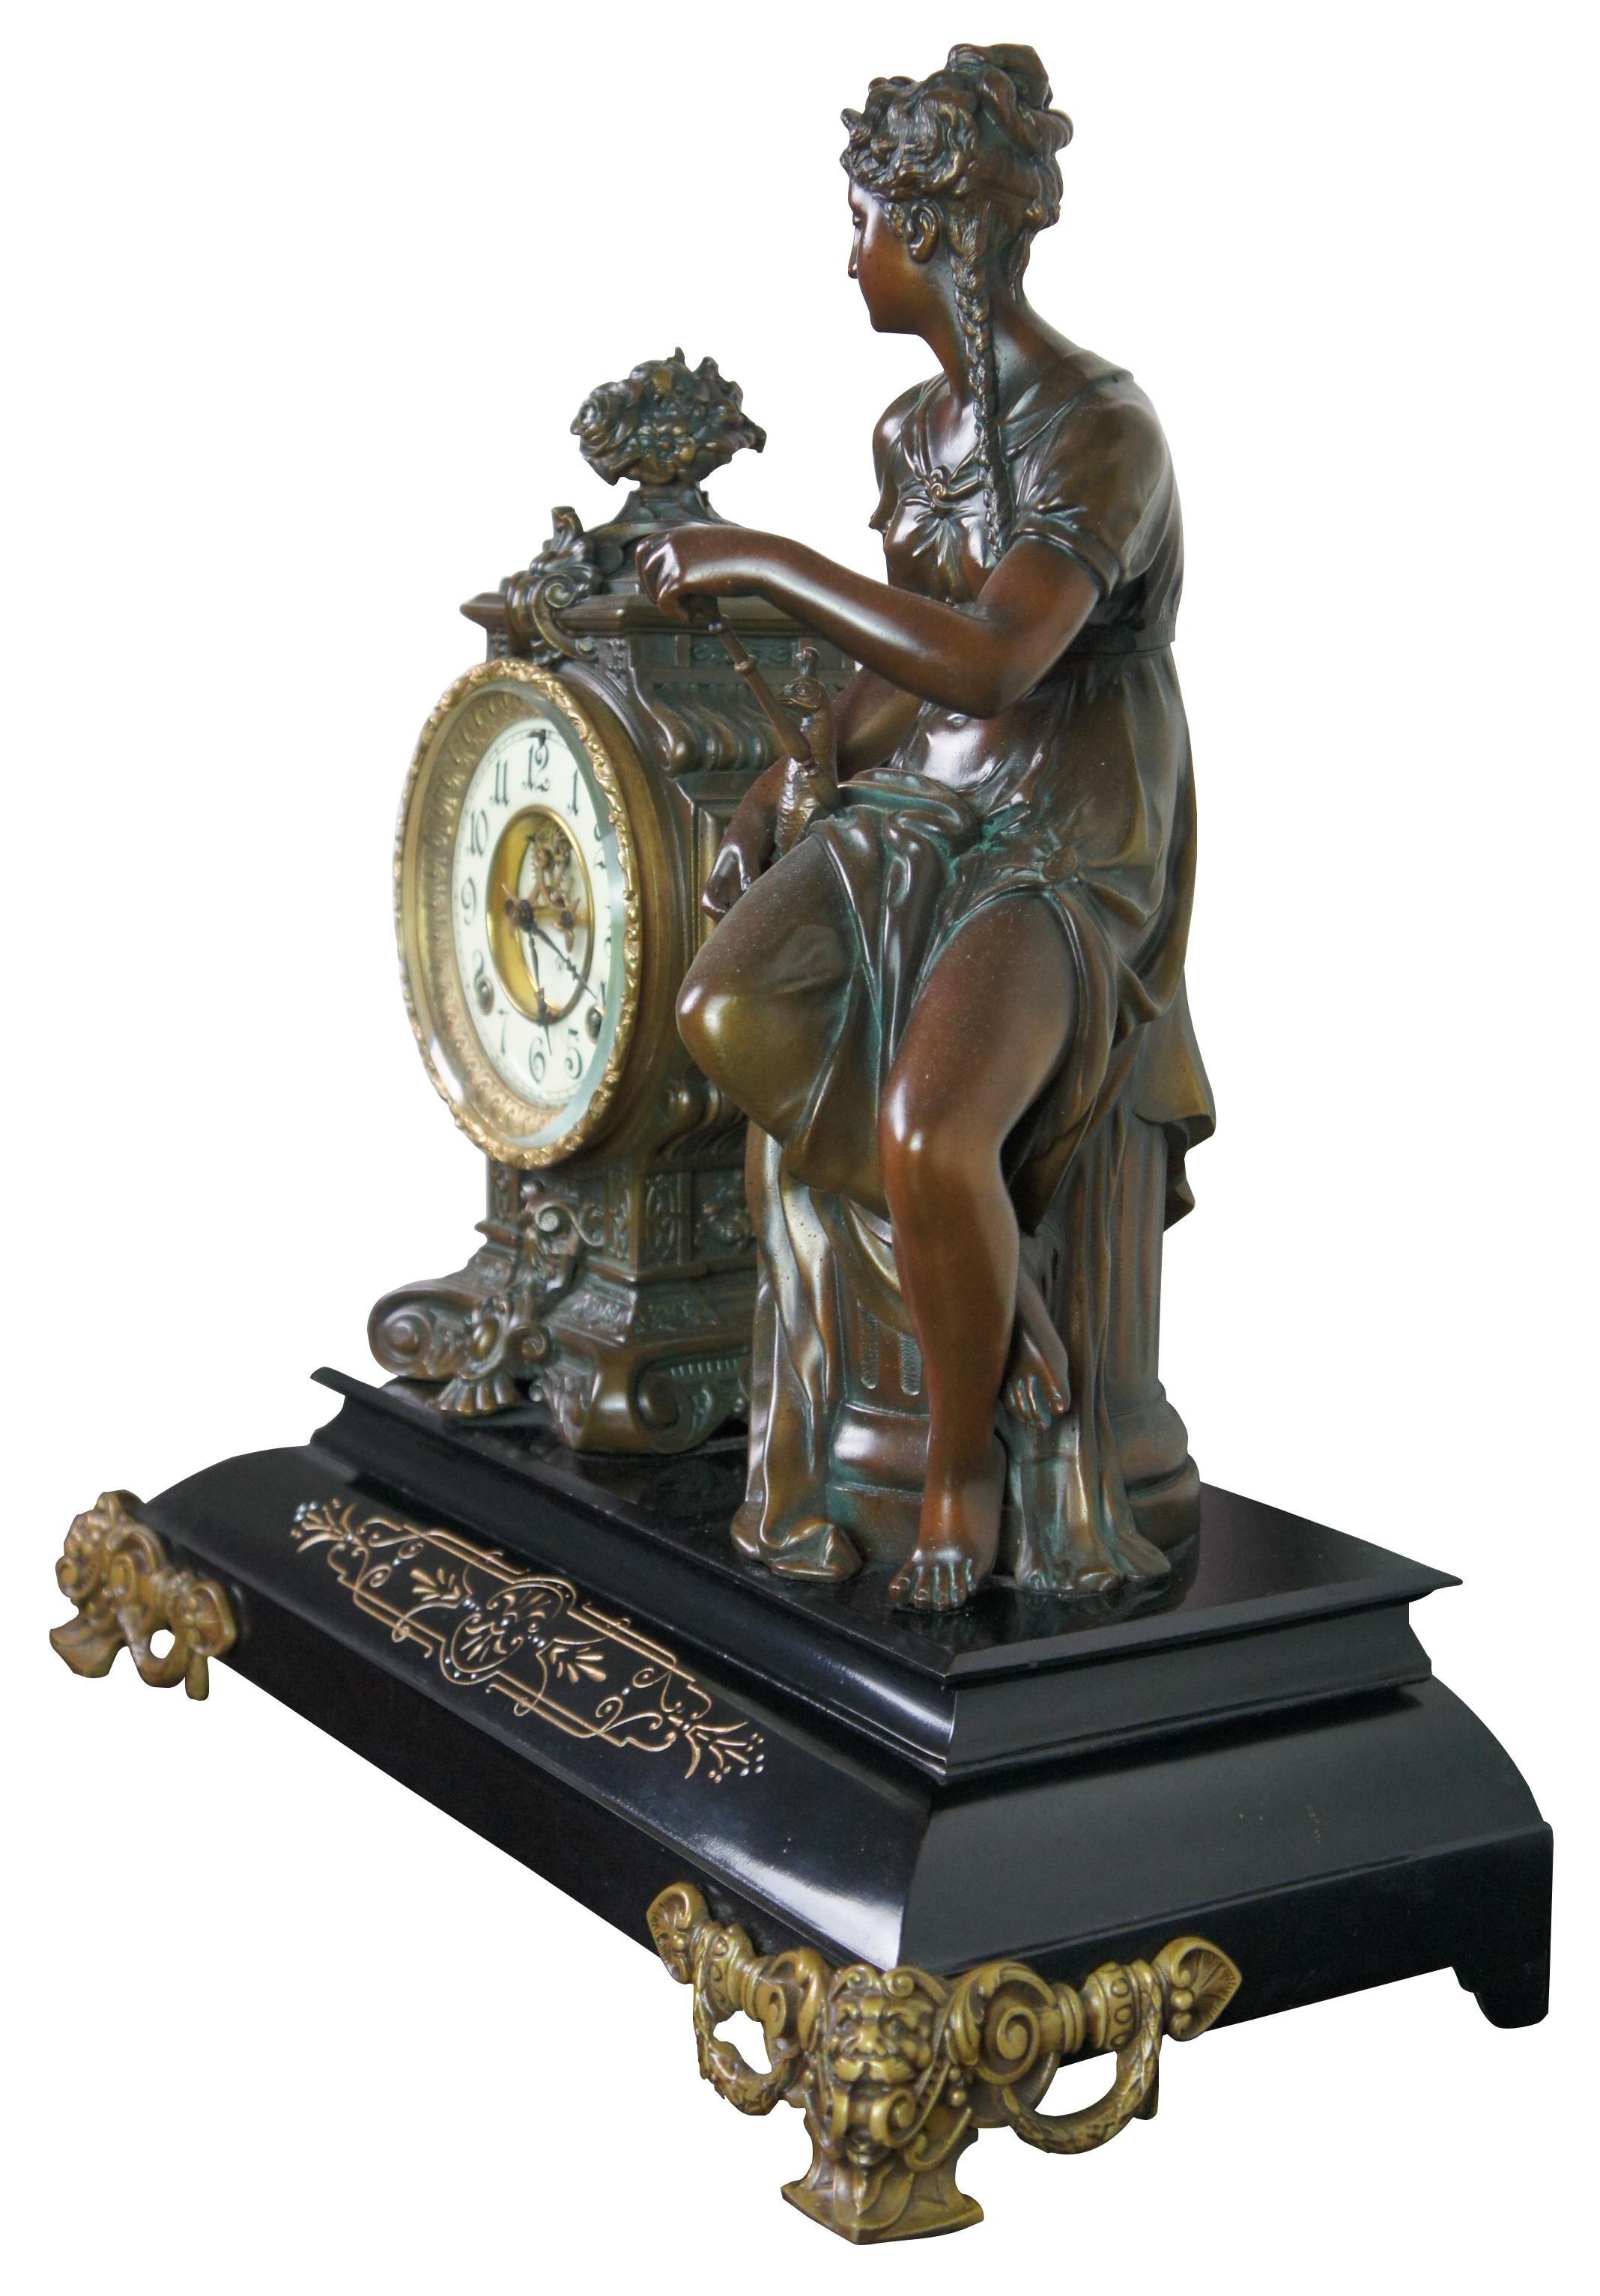 A rare and impressive Antique 1881 Ansonia open escapement mantel clock. Made of bronze and marble featuring neoclassical styling with a woman seated on a Corinthian column with her pet pheasant bird and gold footed base with half Northwind face